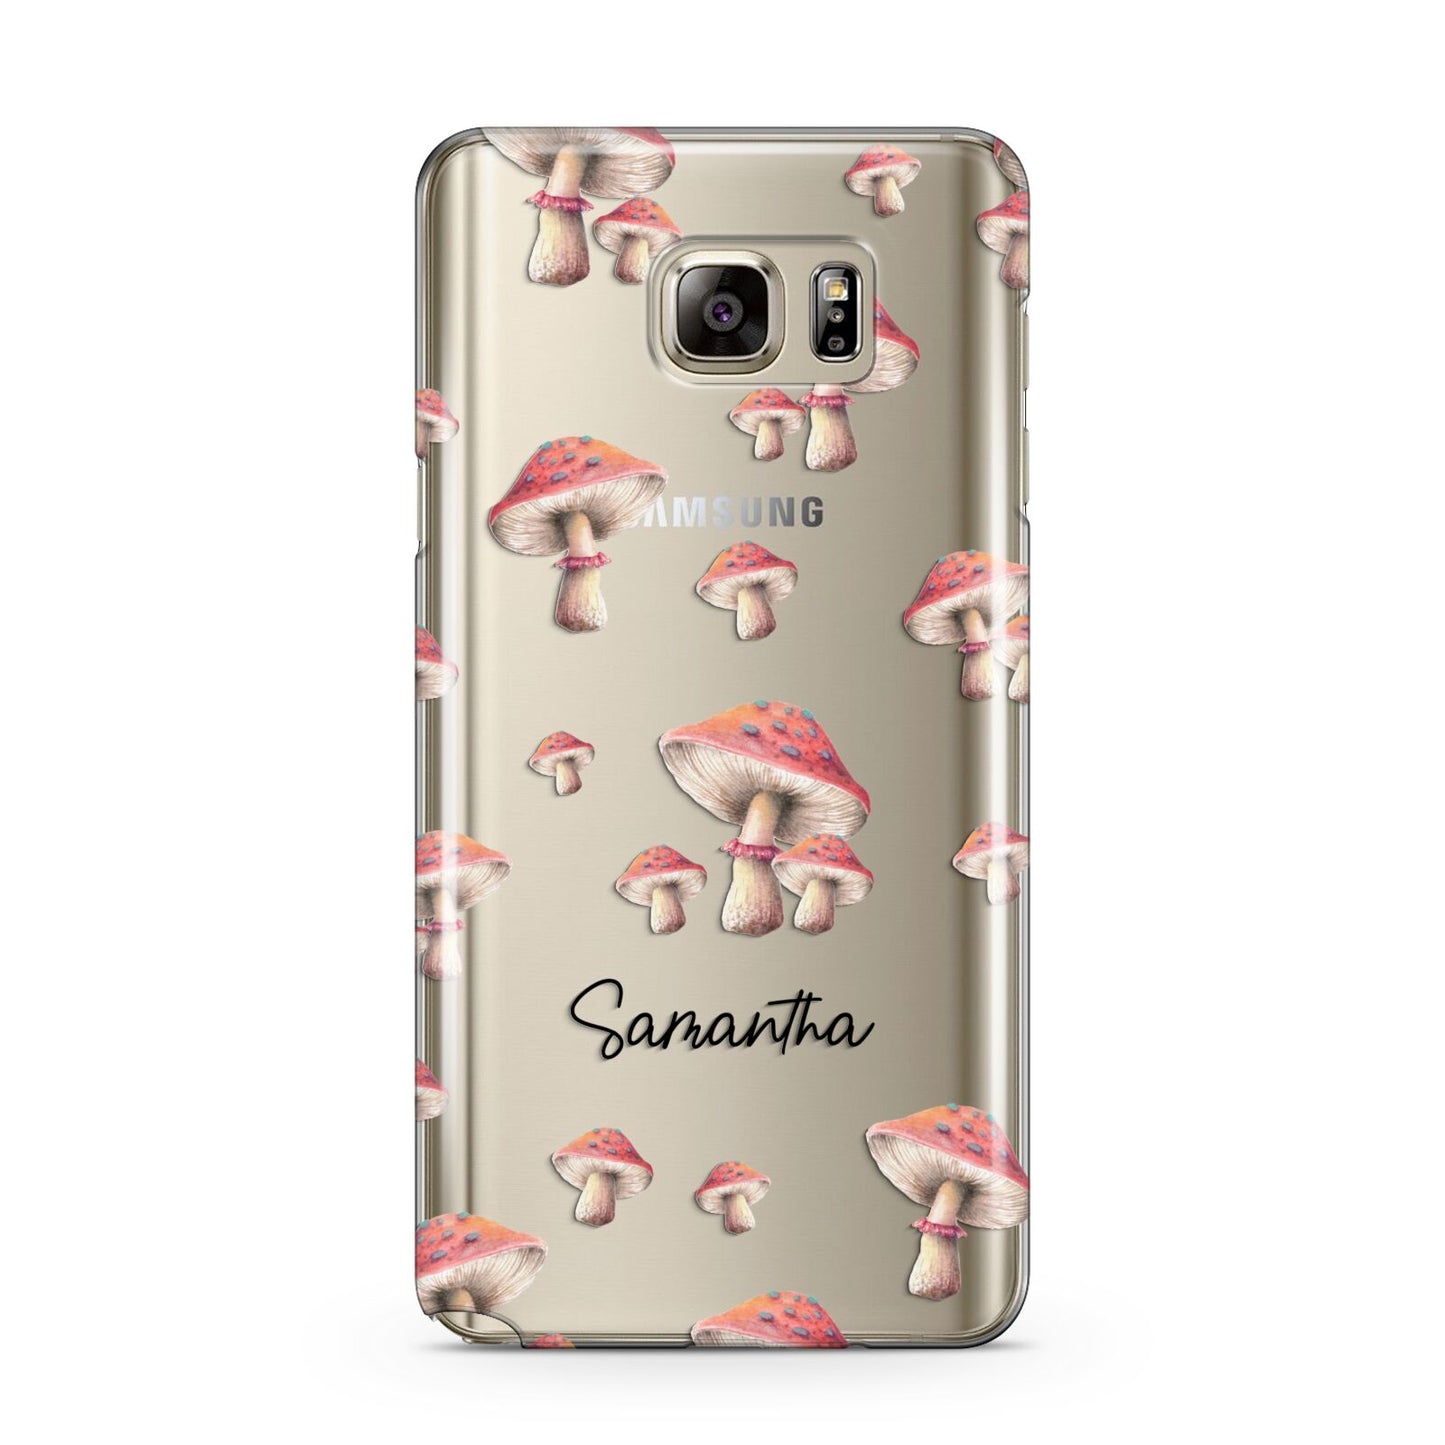 Mushroom Illustrations with Name Samsung Galaxy Note 5 Case